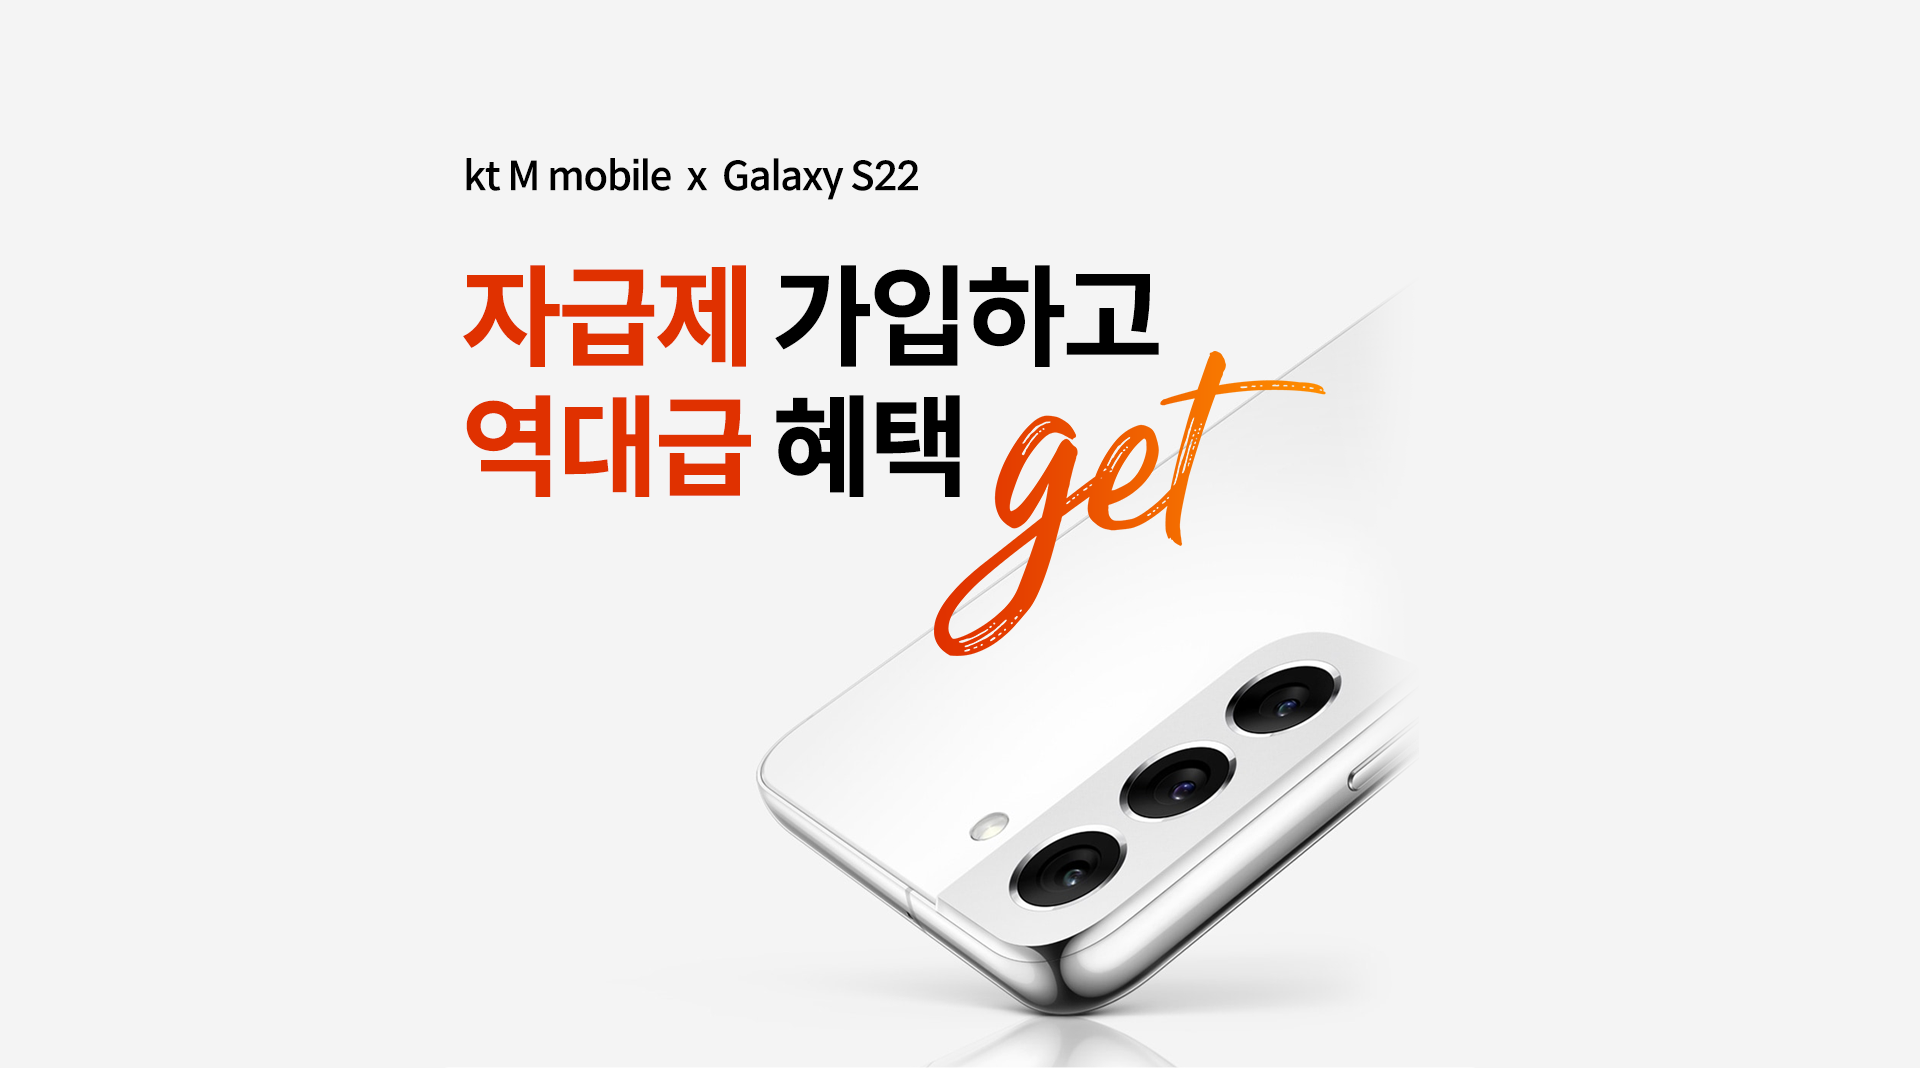 kt M mobile x Galaxy S22